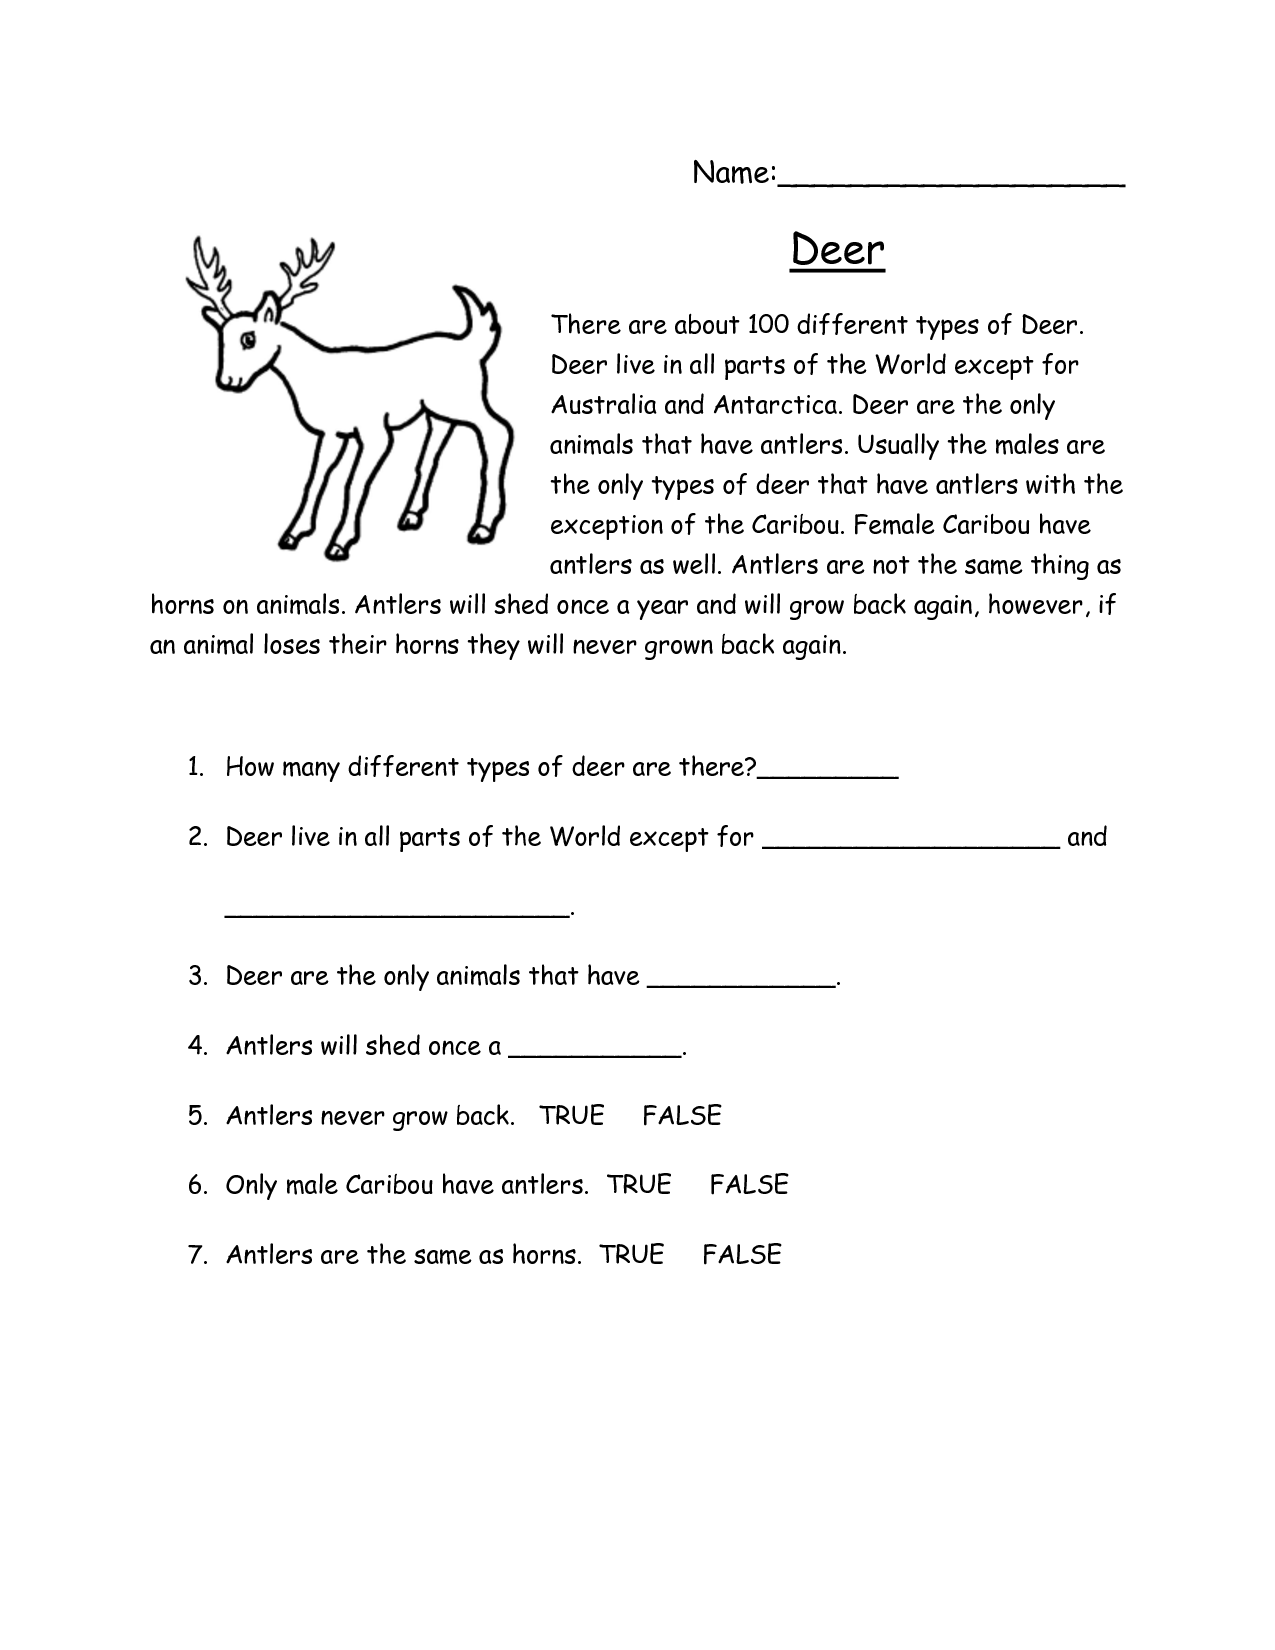 13 Best Images of 5 W's Story Comprehension Worksheets - S and H 5 W